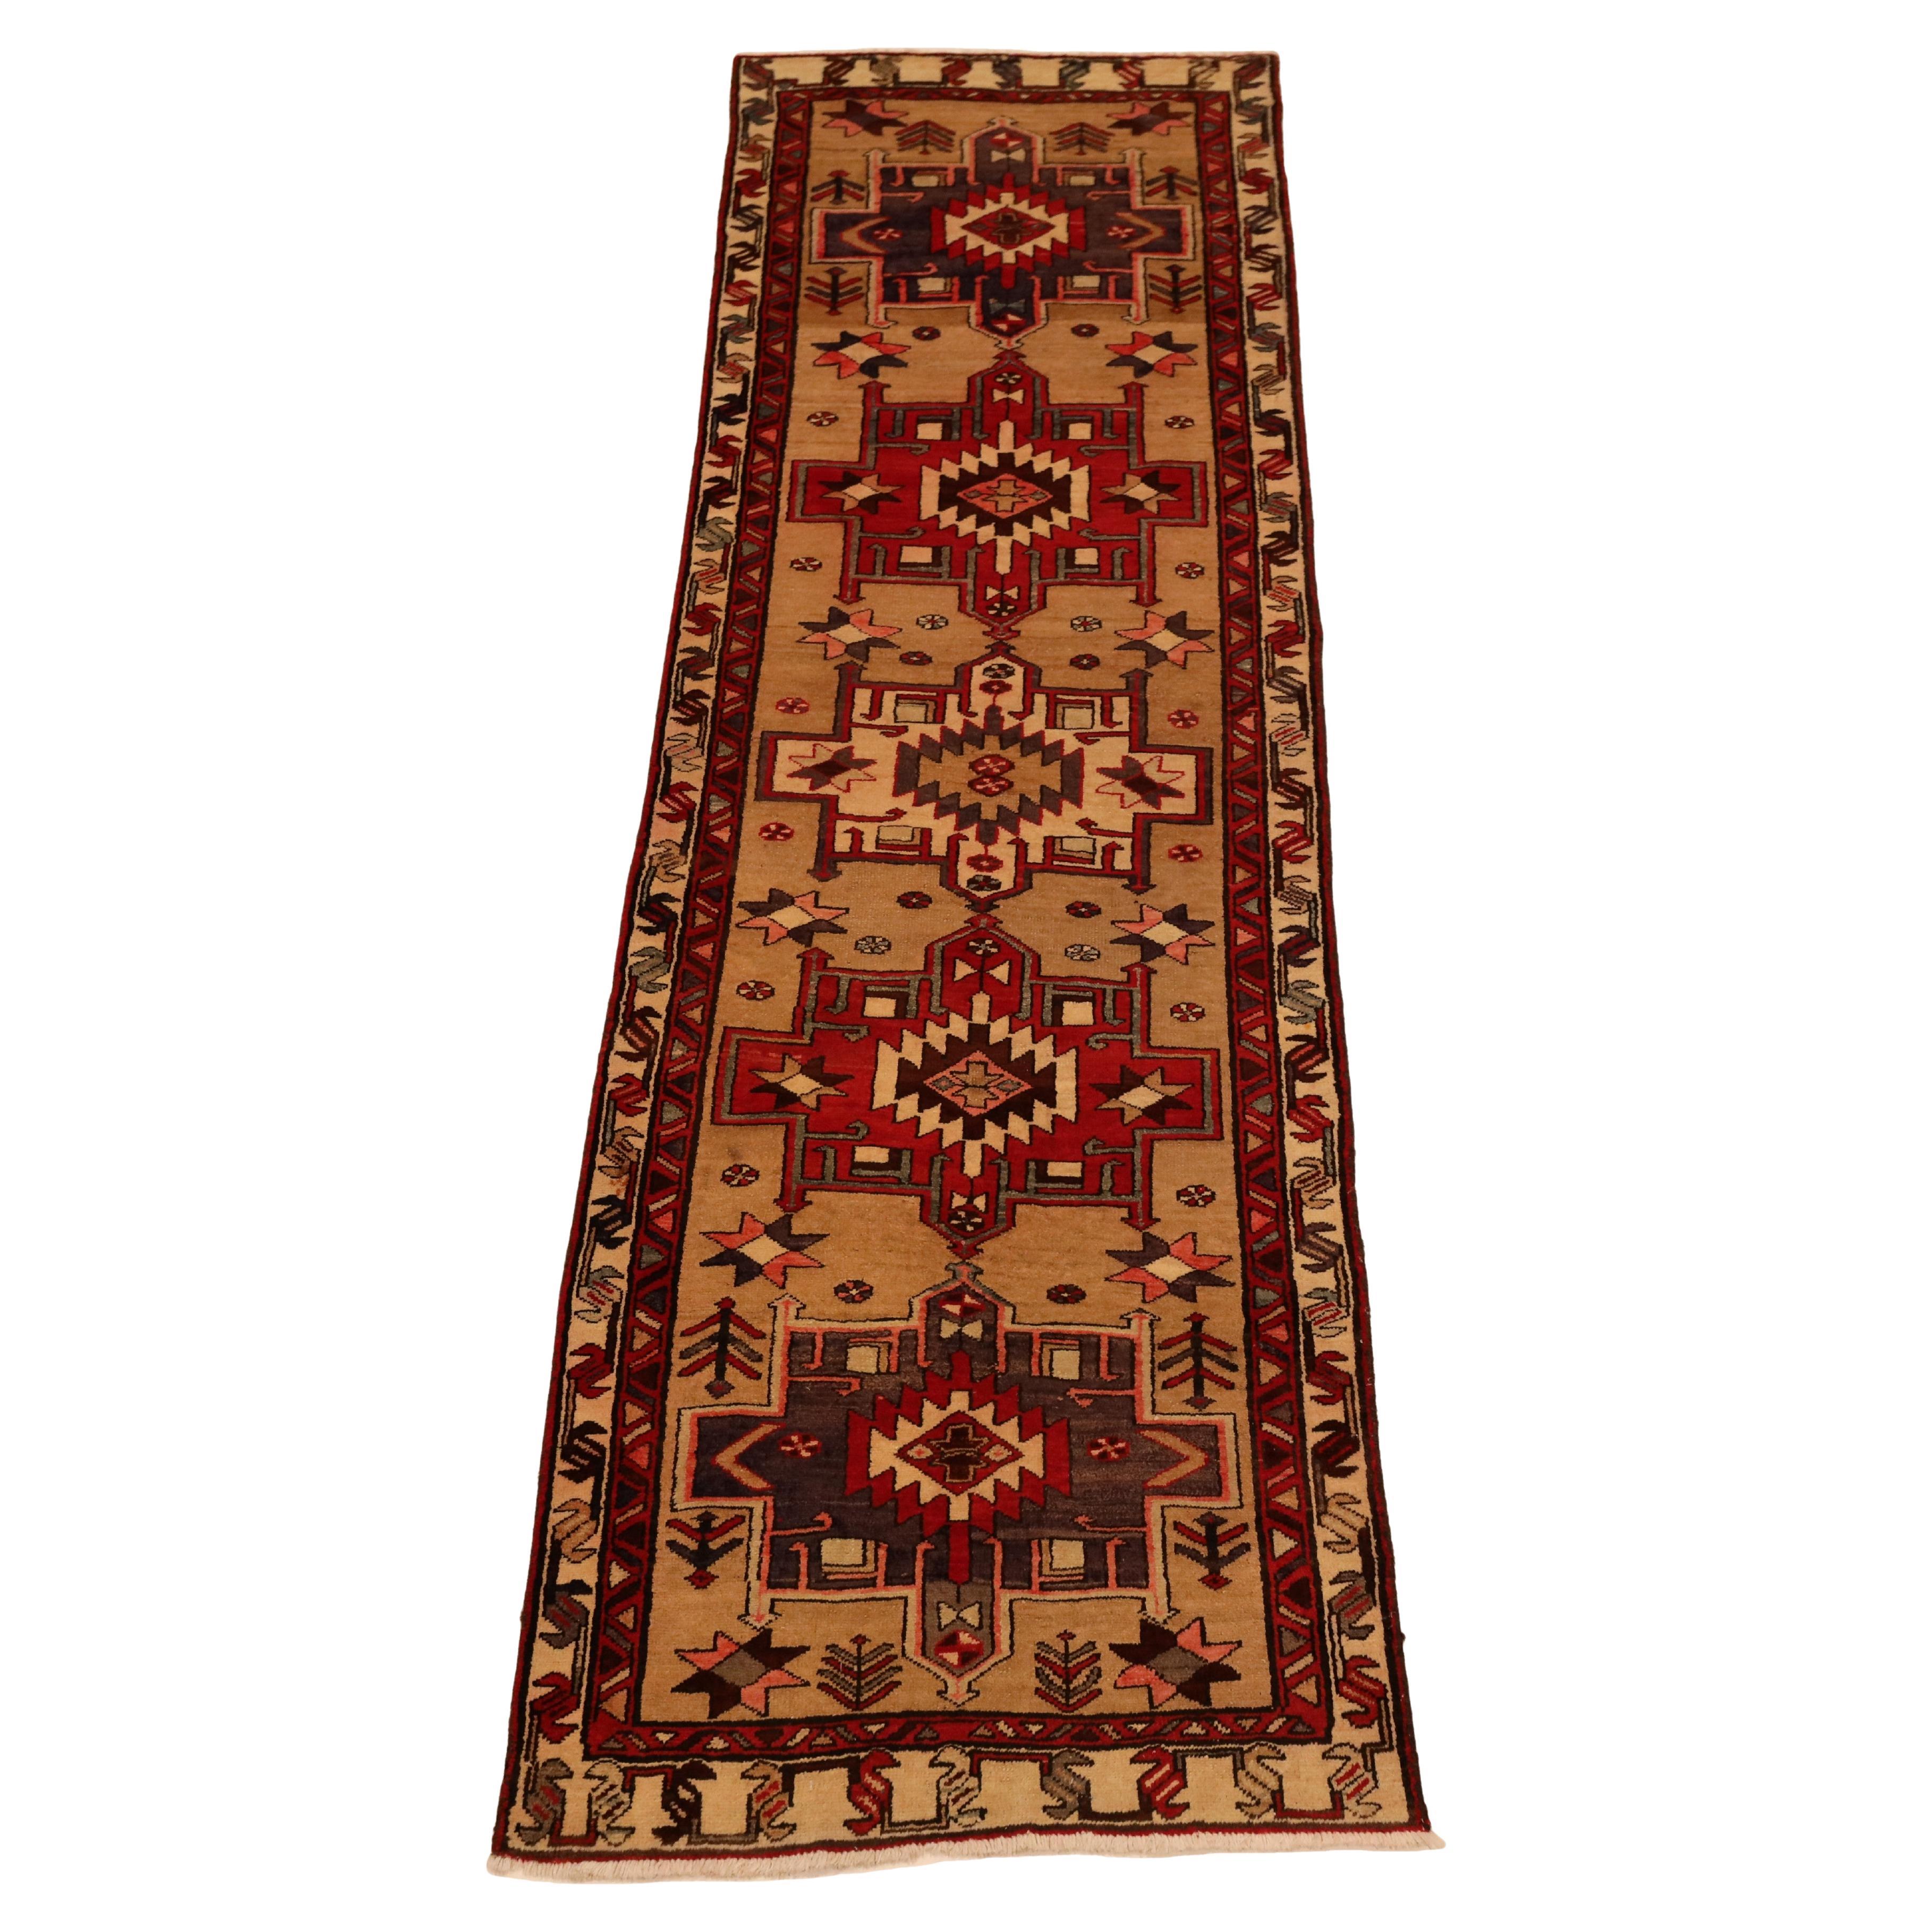 North-West Persian Semi-Antique Runner - 2'11" x 9'9" For Sale